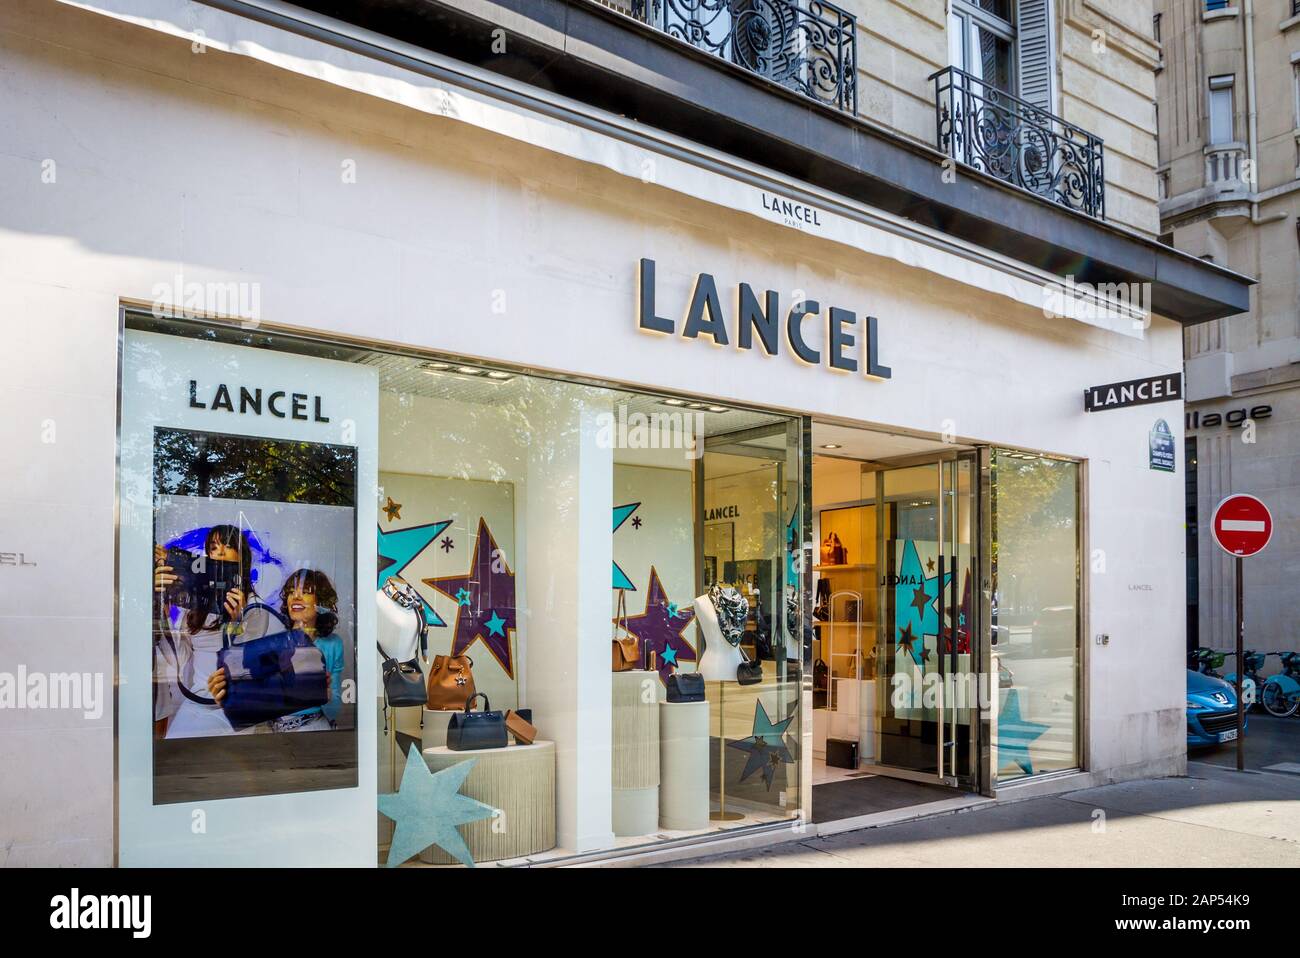 Paris/France - September 10, 2019 : The Lancel luxury leather goods store on Champs-Elysees avenue Stock Photo